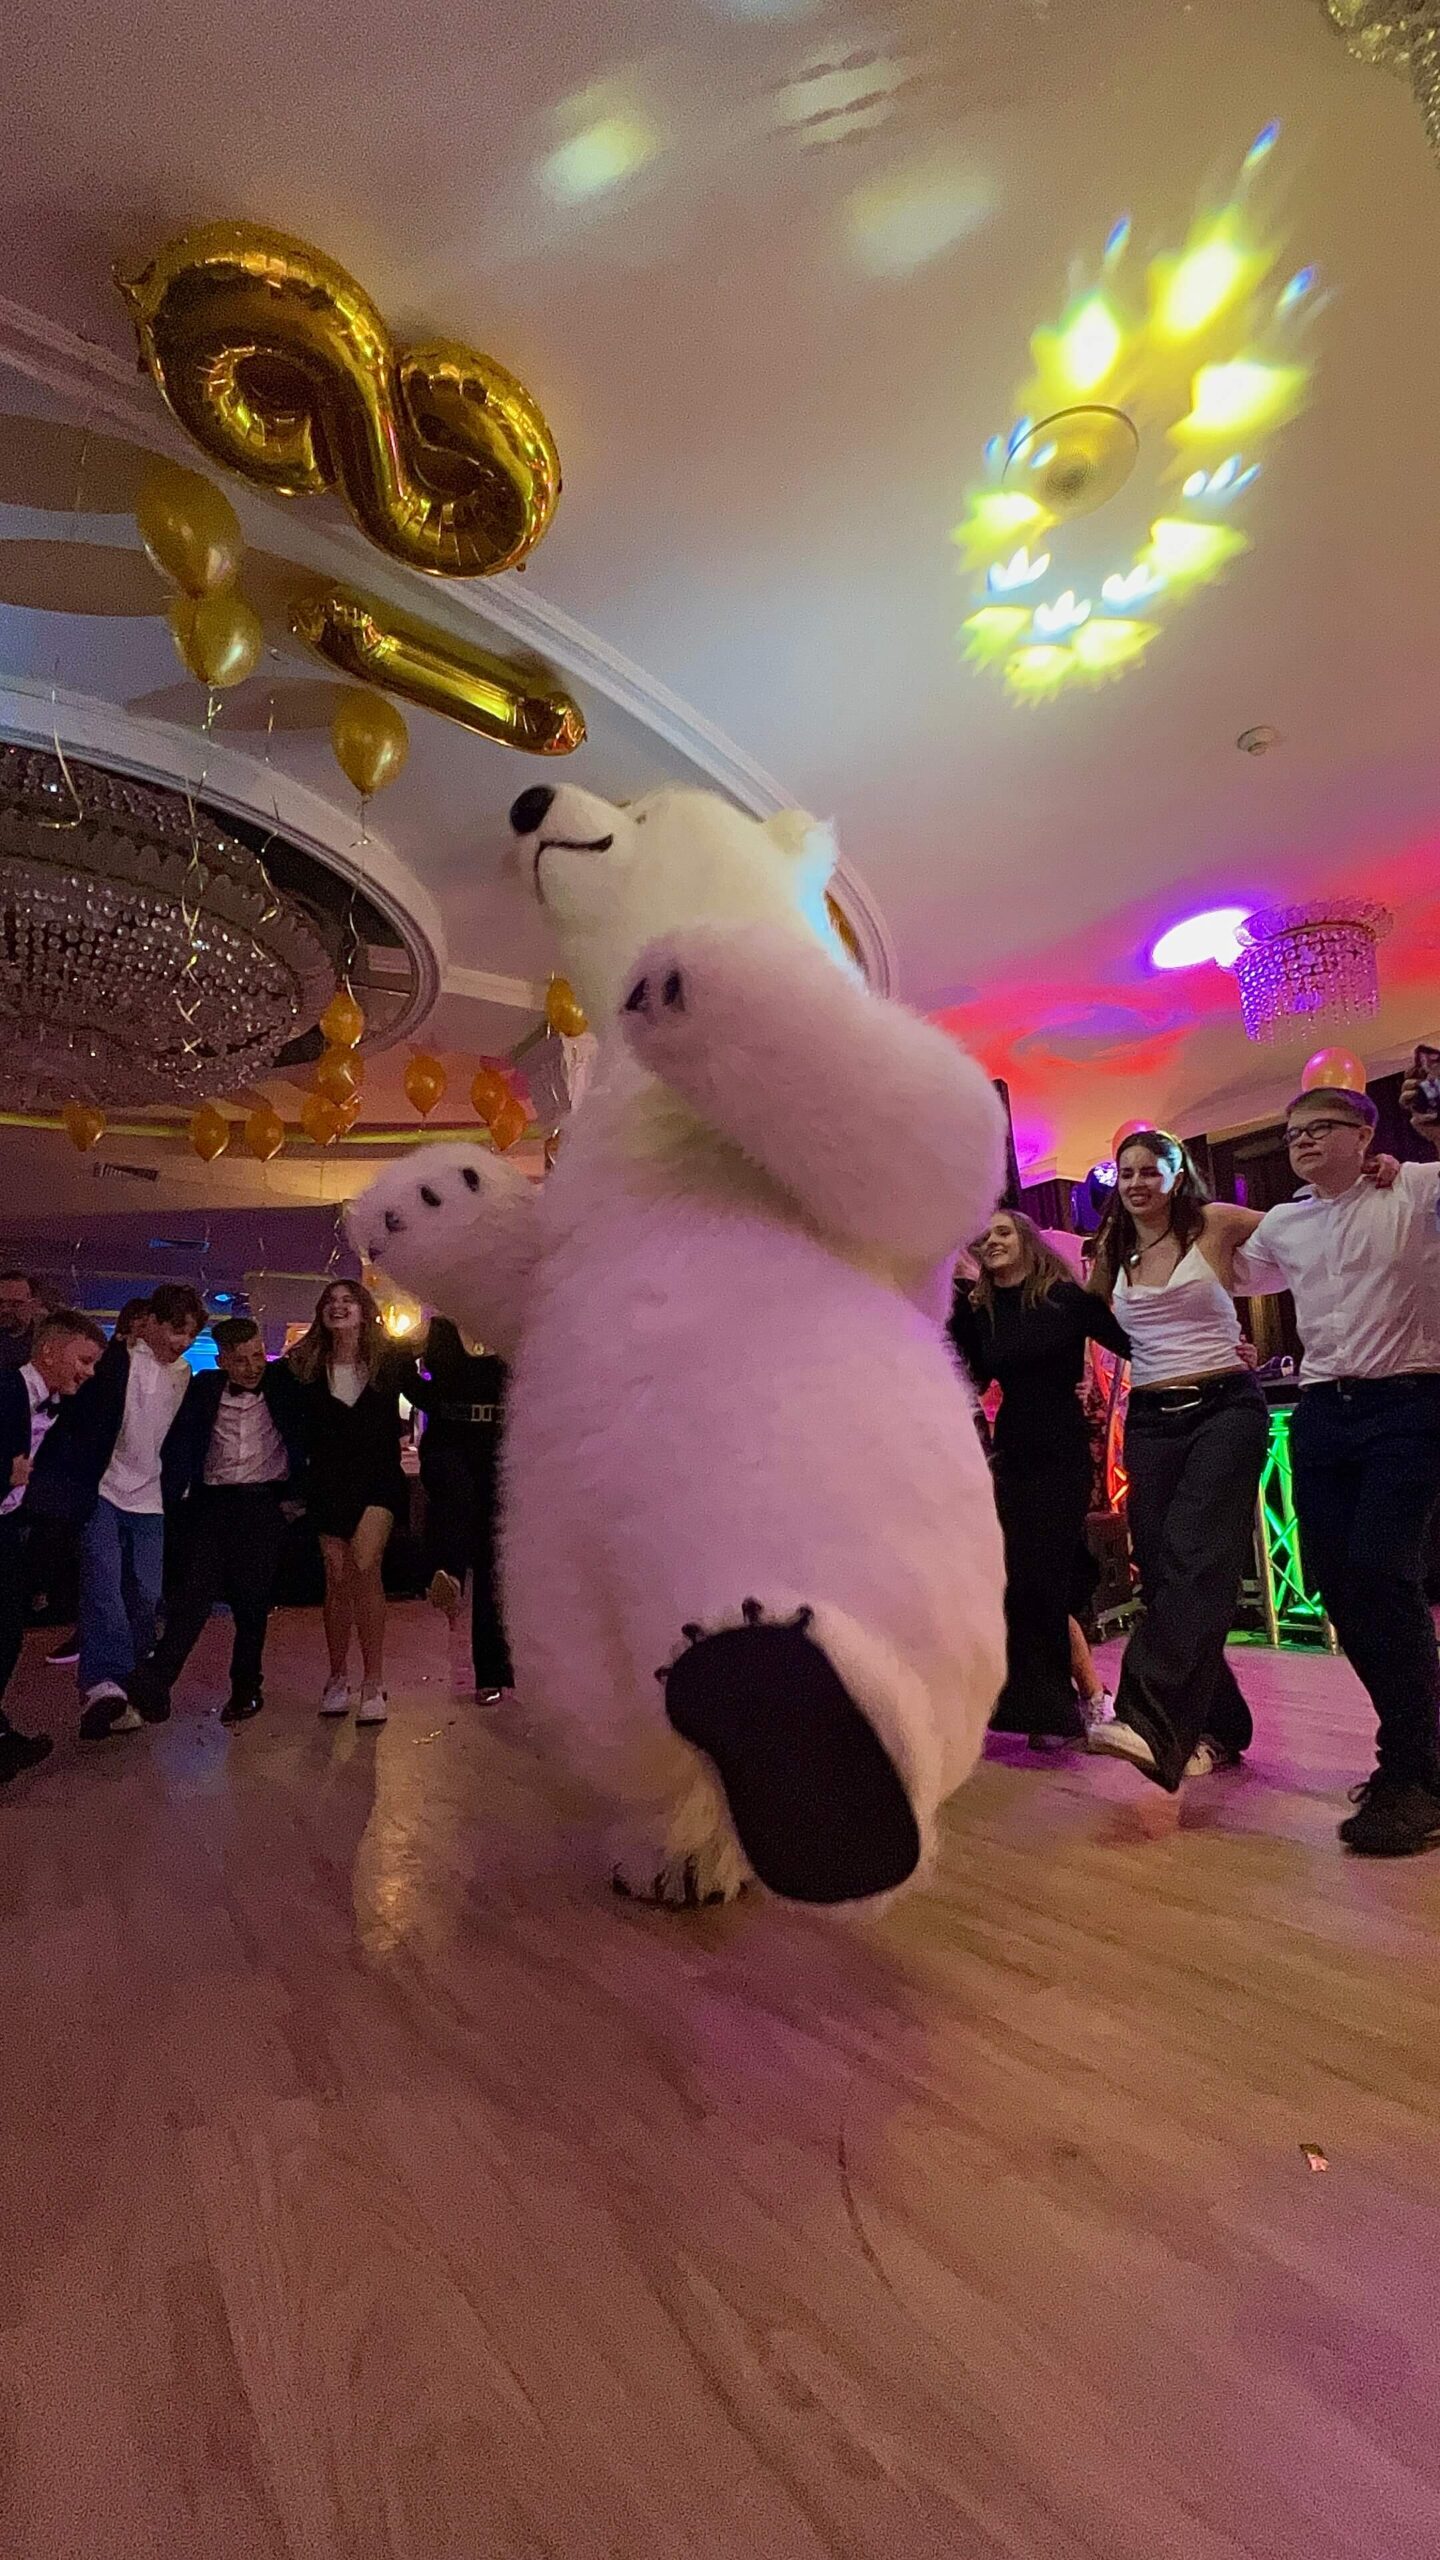 Person in a polar bear costume dancing at a party with golden '16' balloons and colorful lights in the background.